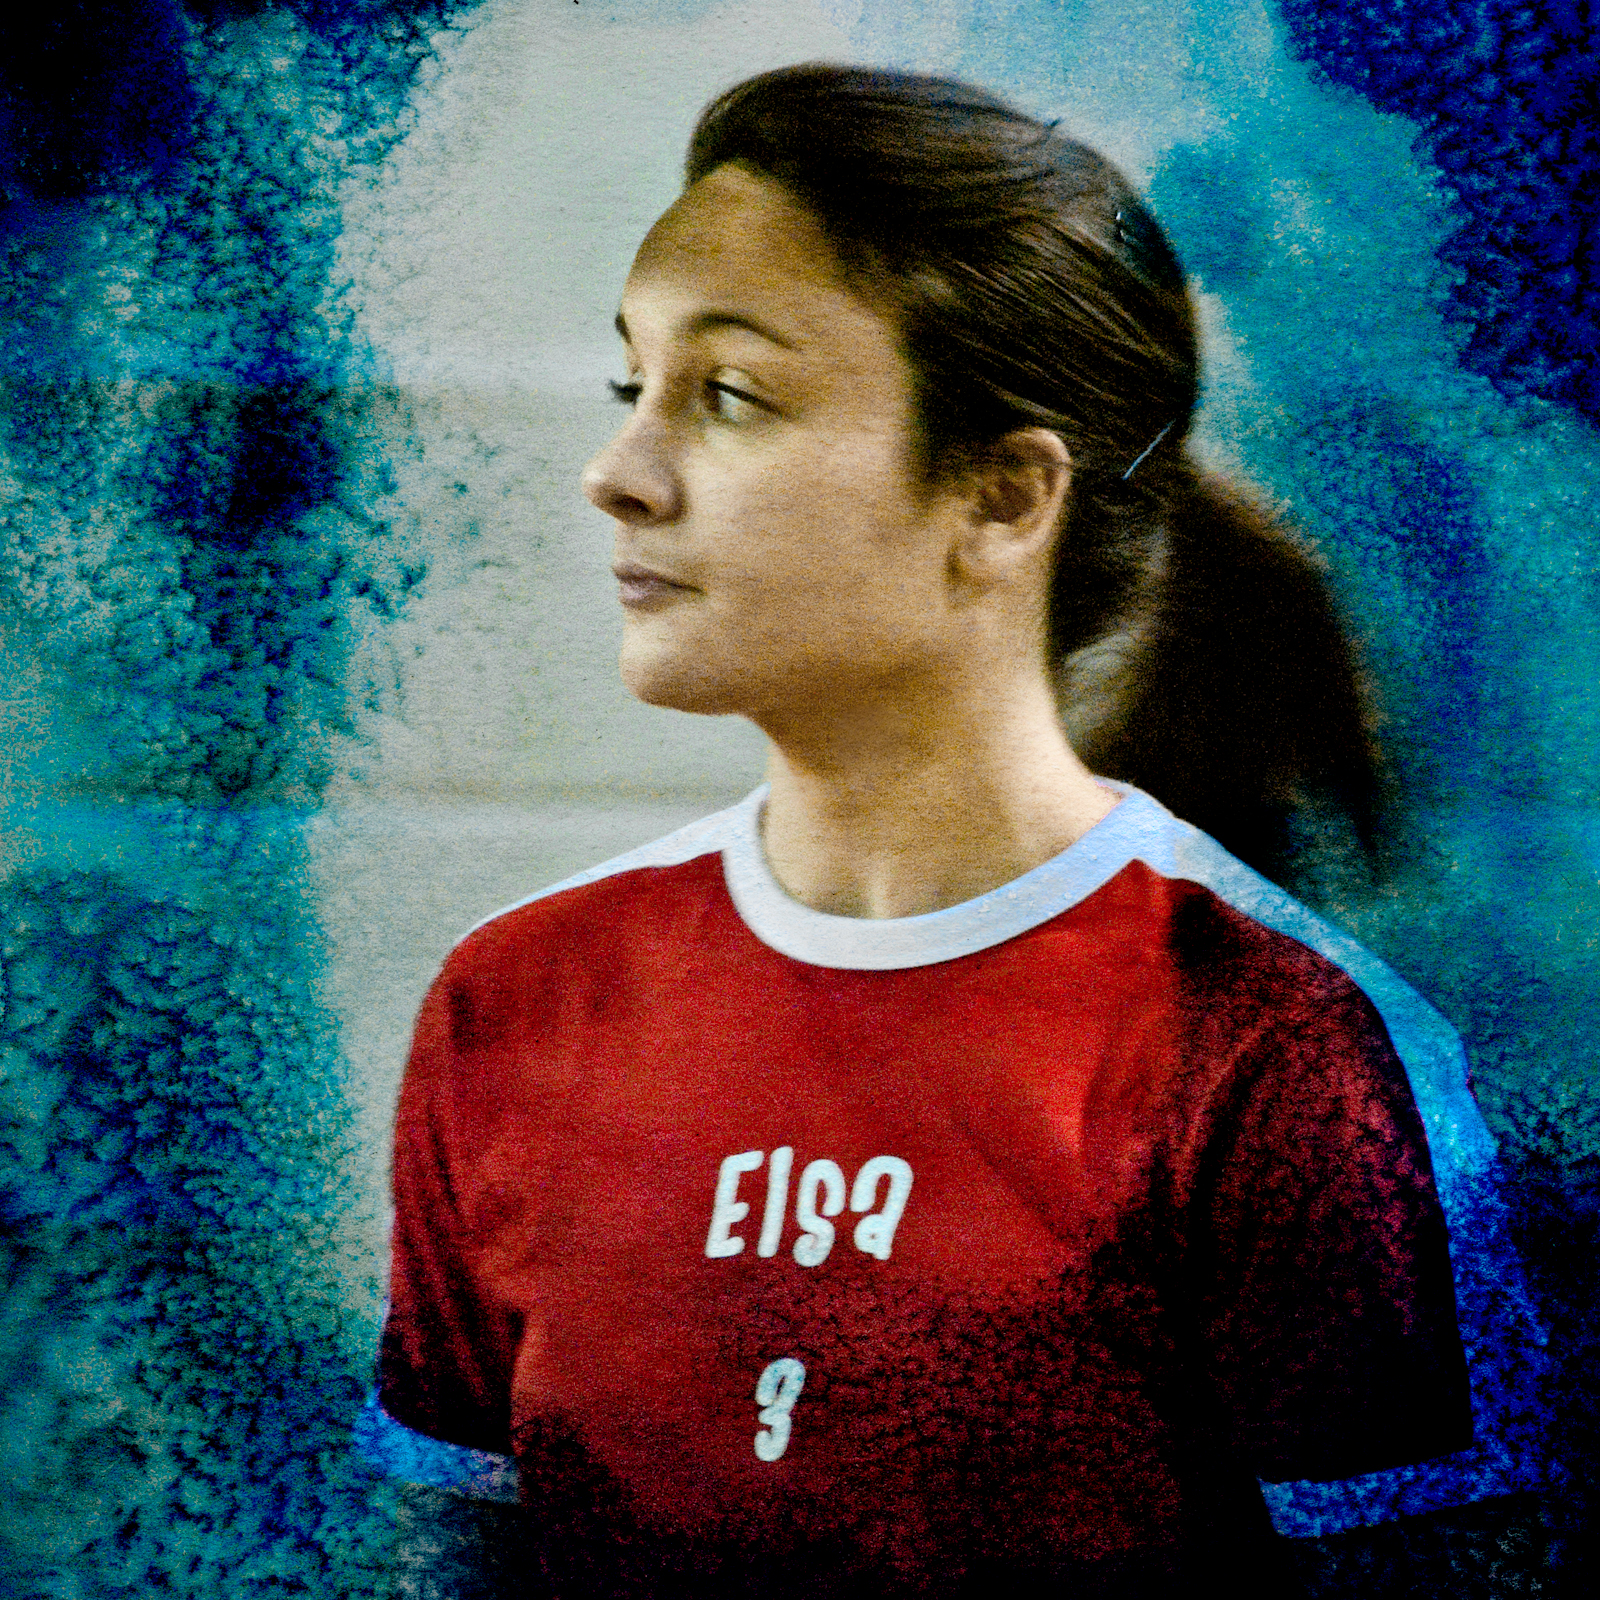 a girl wearing a red and blue jersey looking back